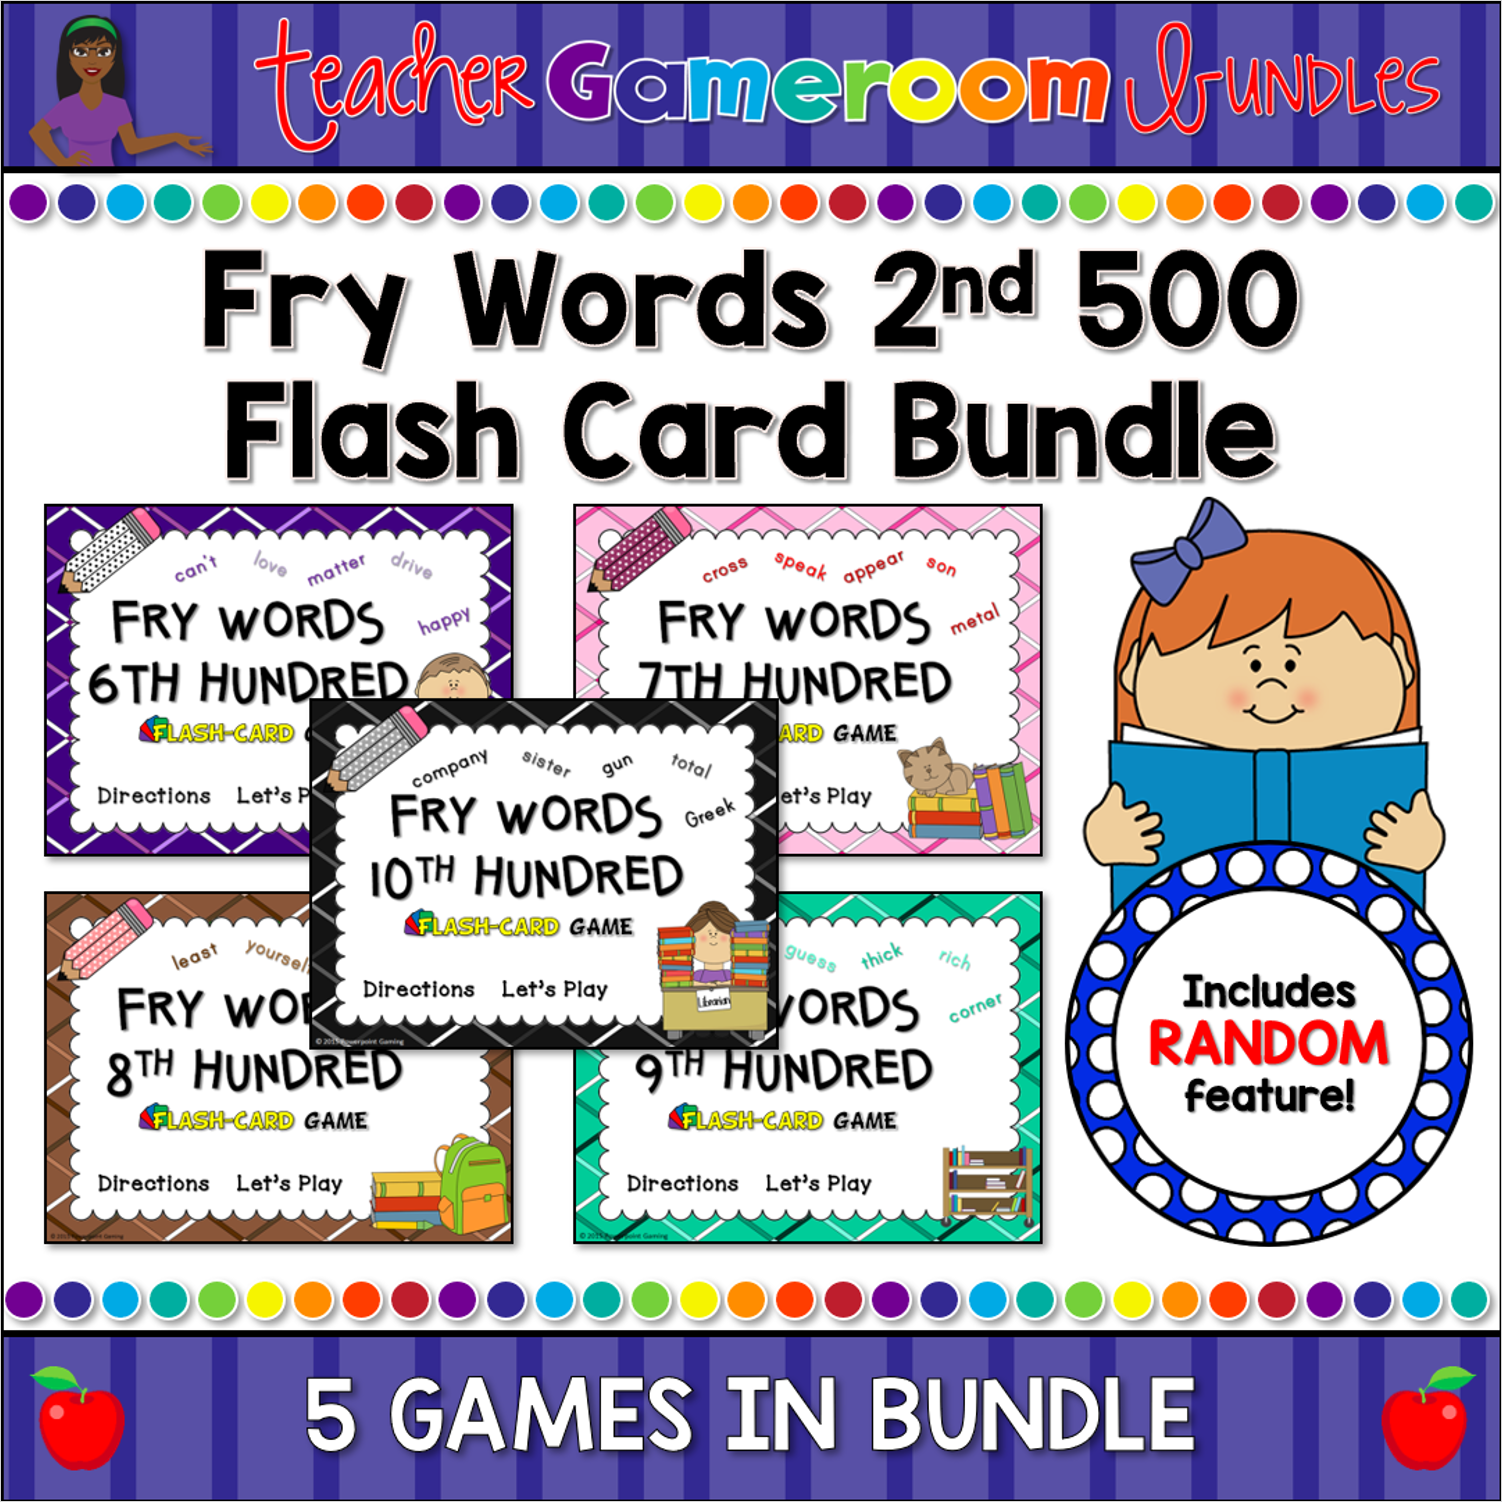 2nd-500-fry-words-flash-cards-cover-teacher-gameroom